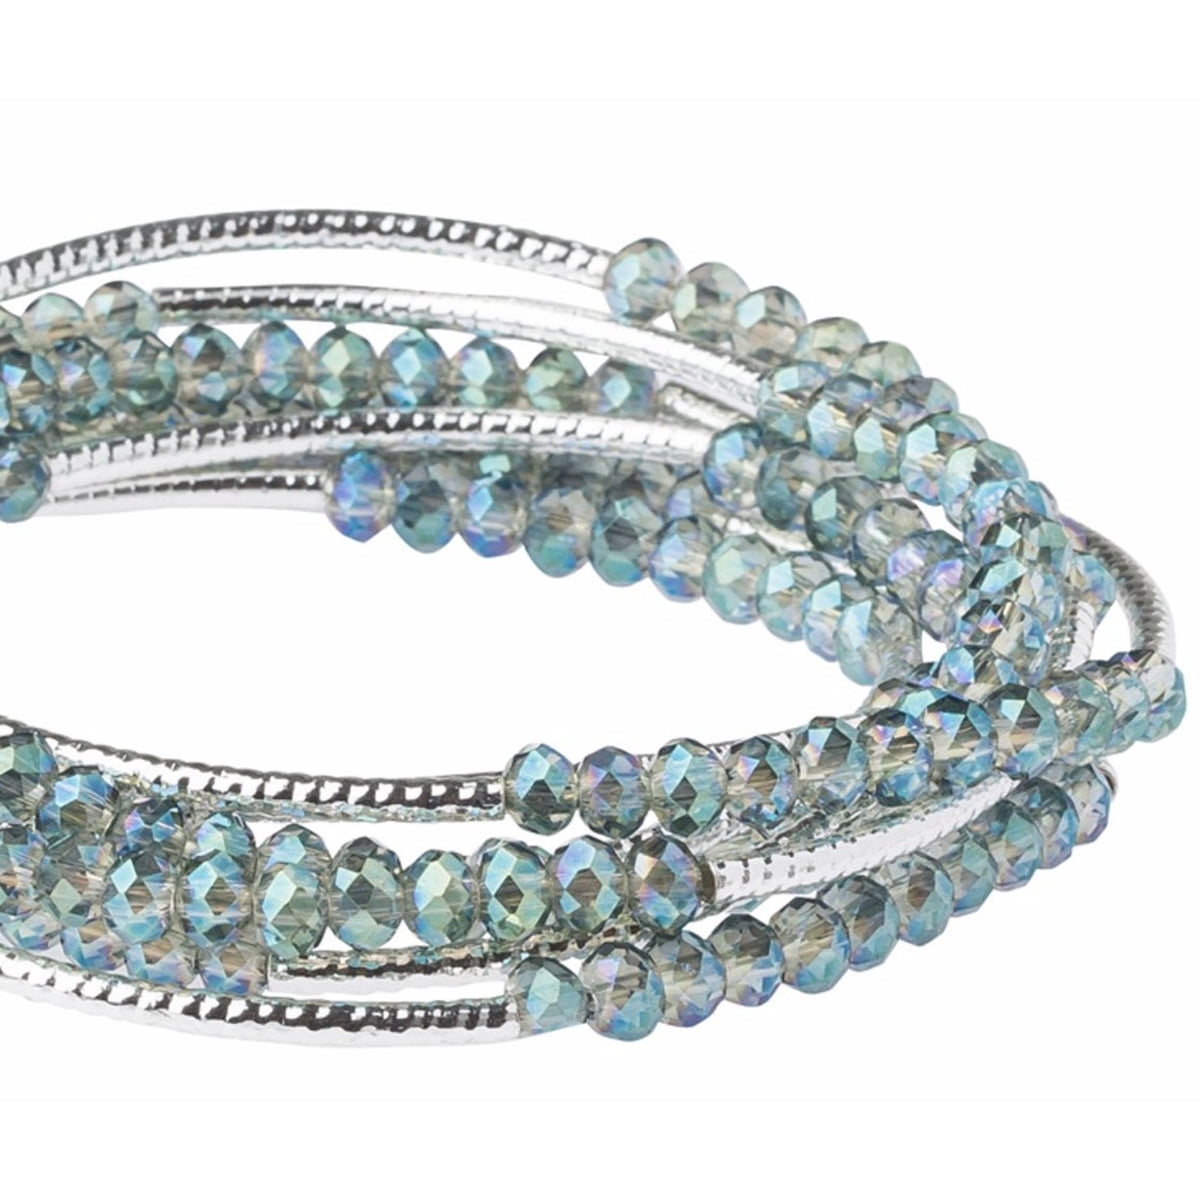 Scout Curated Wears Scout Wrap Bracelet to Necklace Seabreeze and Silver